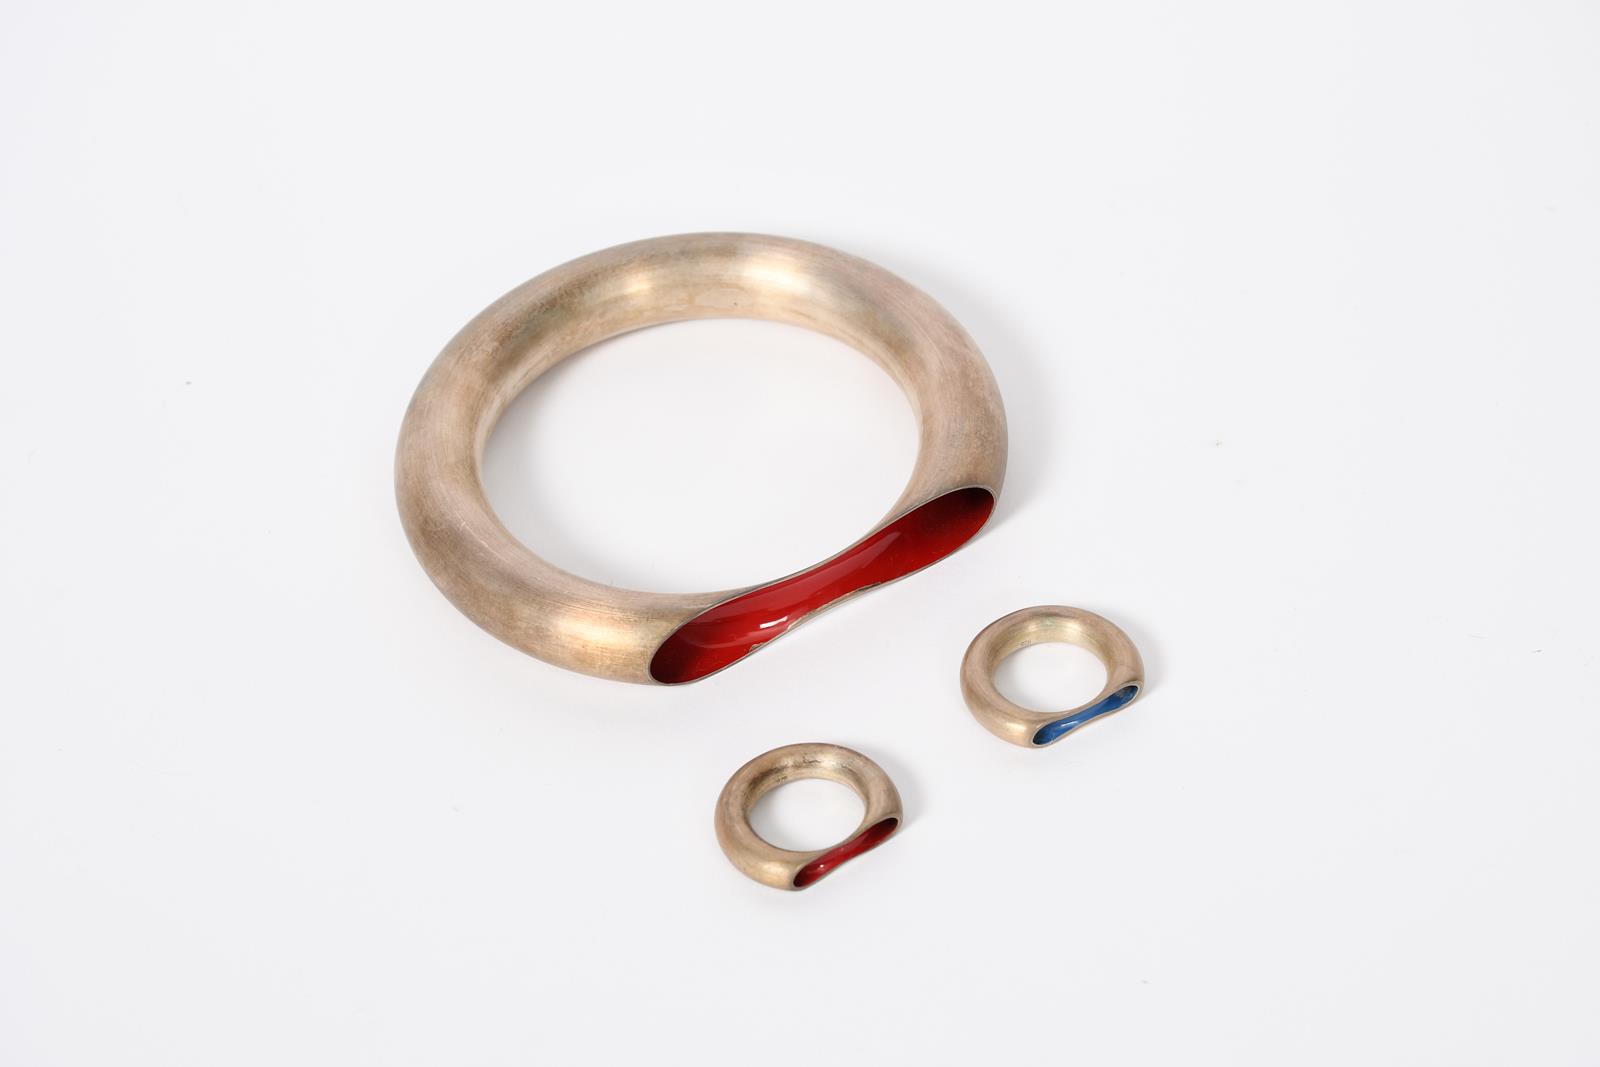 Marc Newson (born 1963) Orgone, a silver bracelet and two rings by chi ha paura, the bracelet and